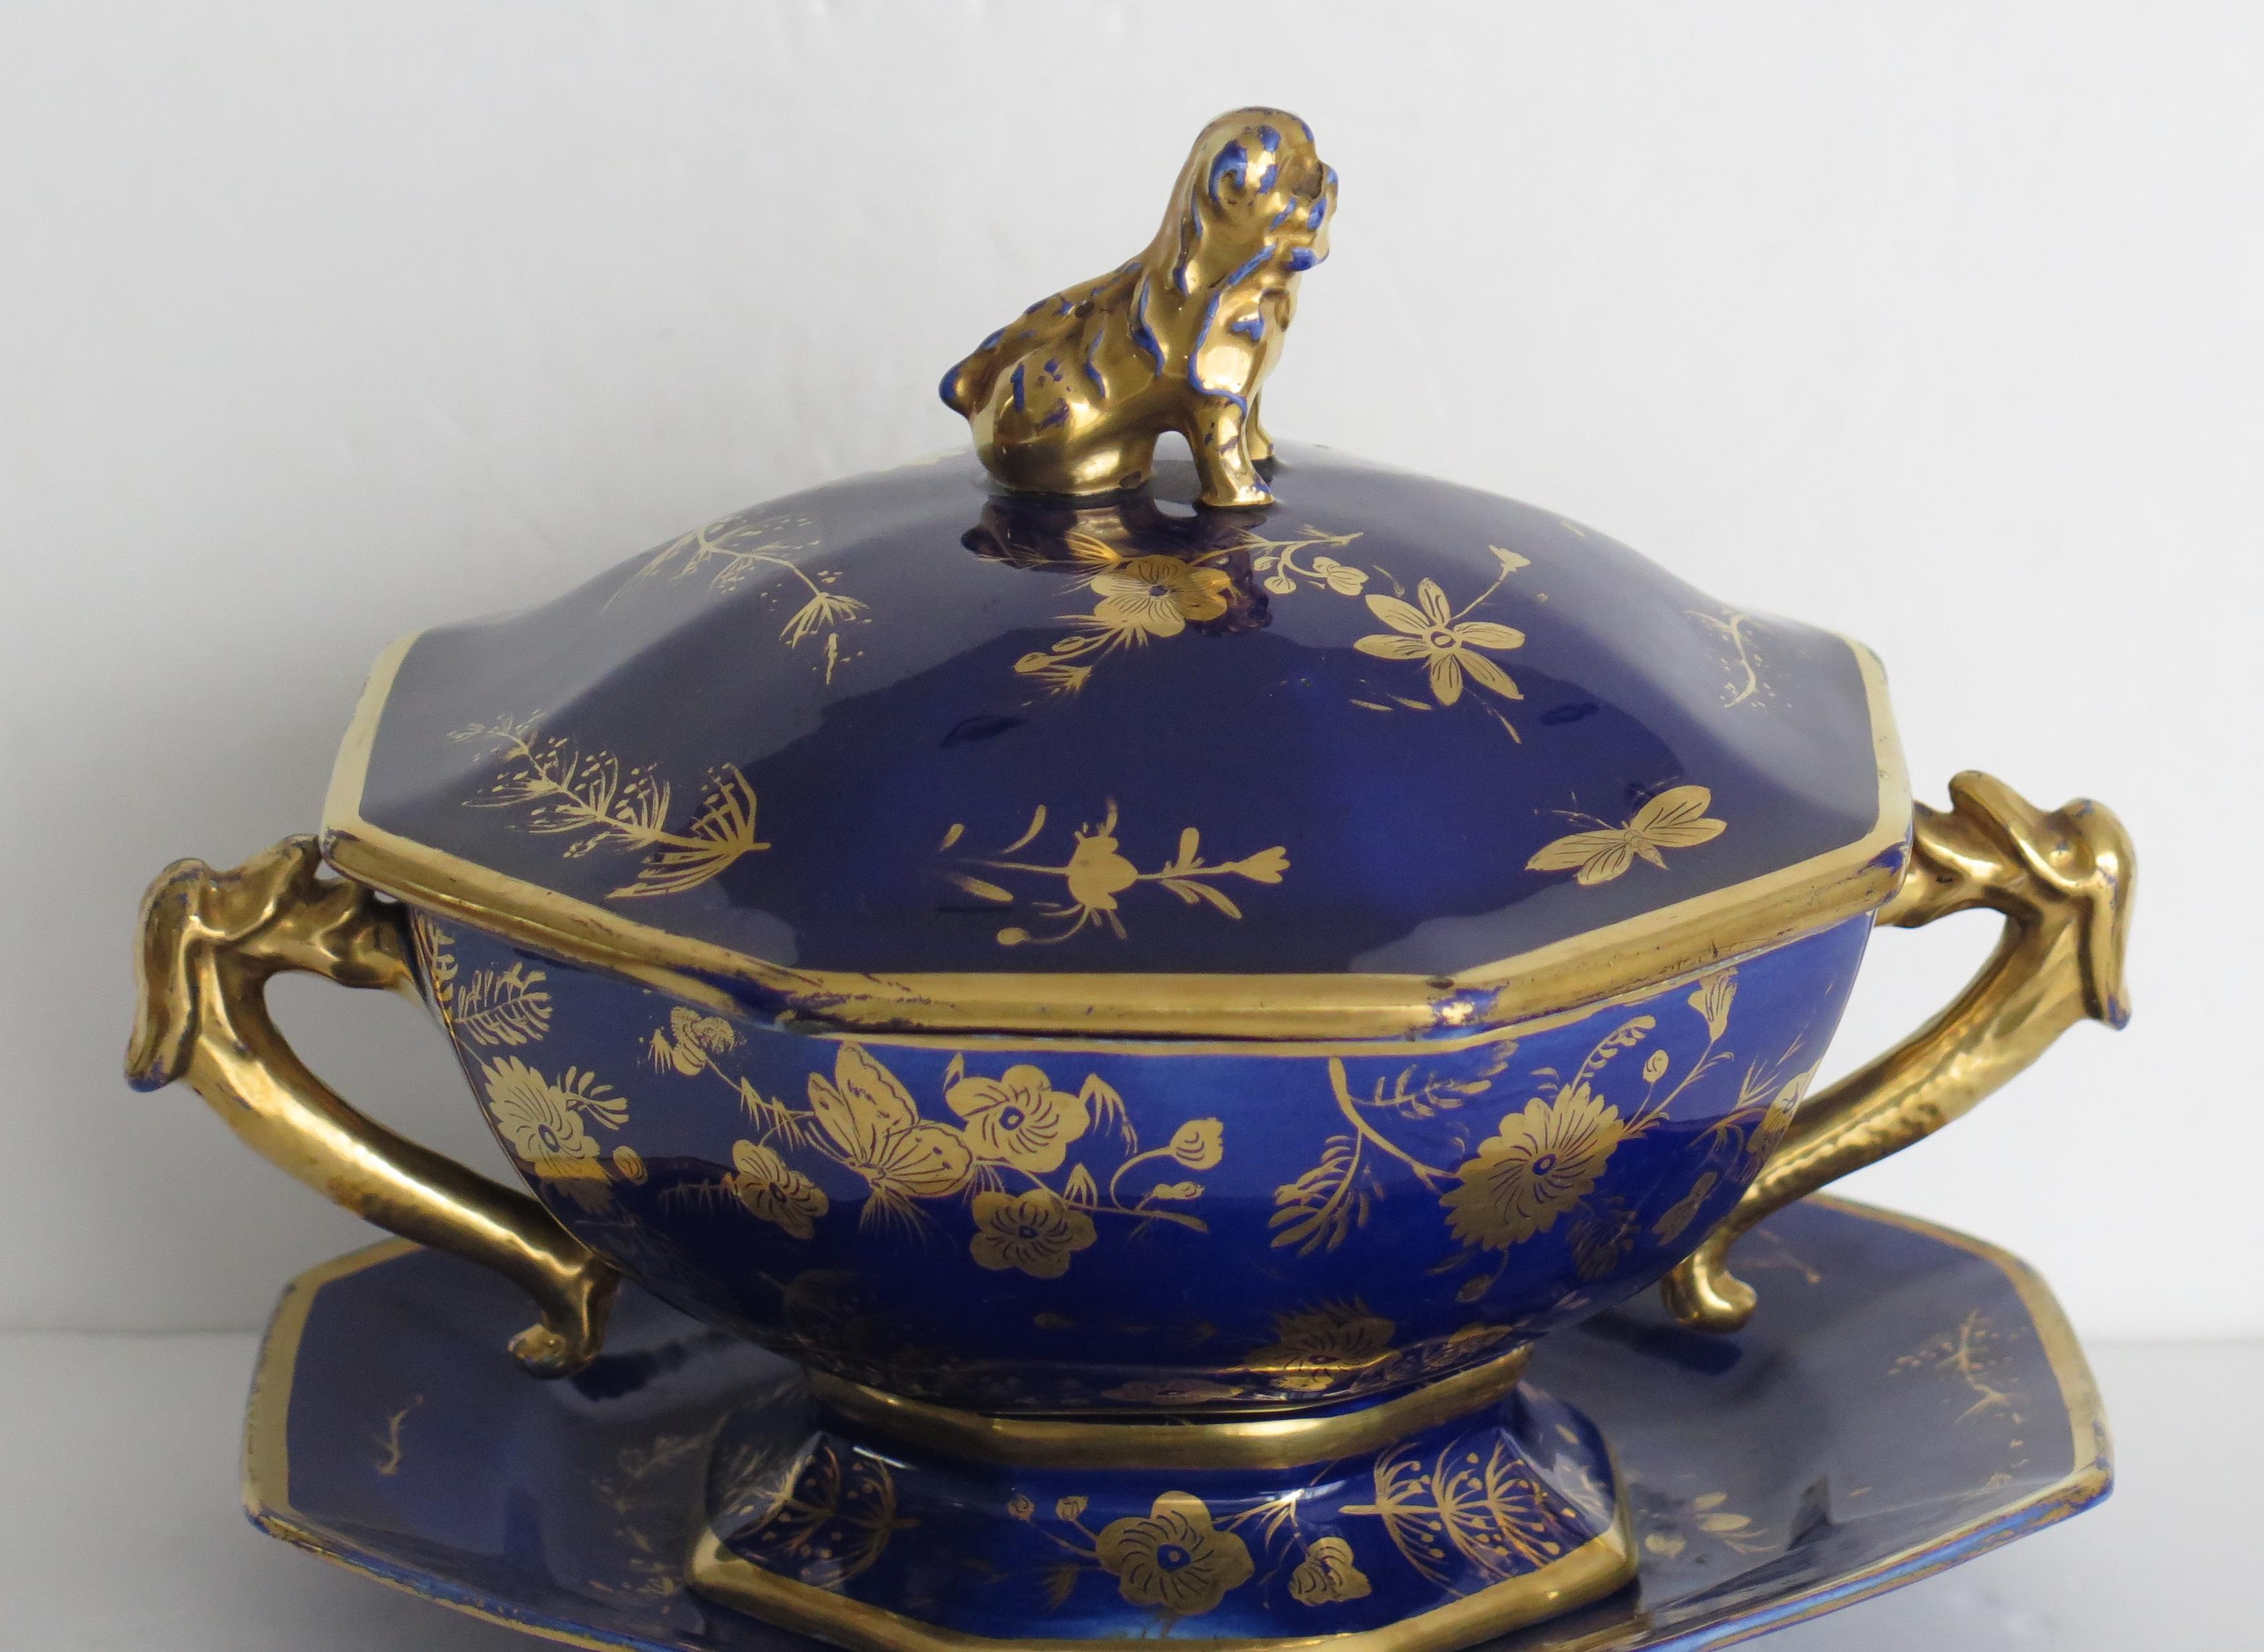 This is a very good ironstone tureen, complete with lid and base stand or plate, all in the Gold Posies pattern and made by Mason's of Lane Delph, Staffordshire, England, during the early part of the 19th century, circa 1820.

All pieces are well